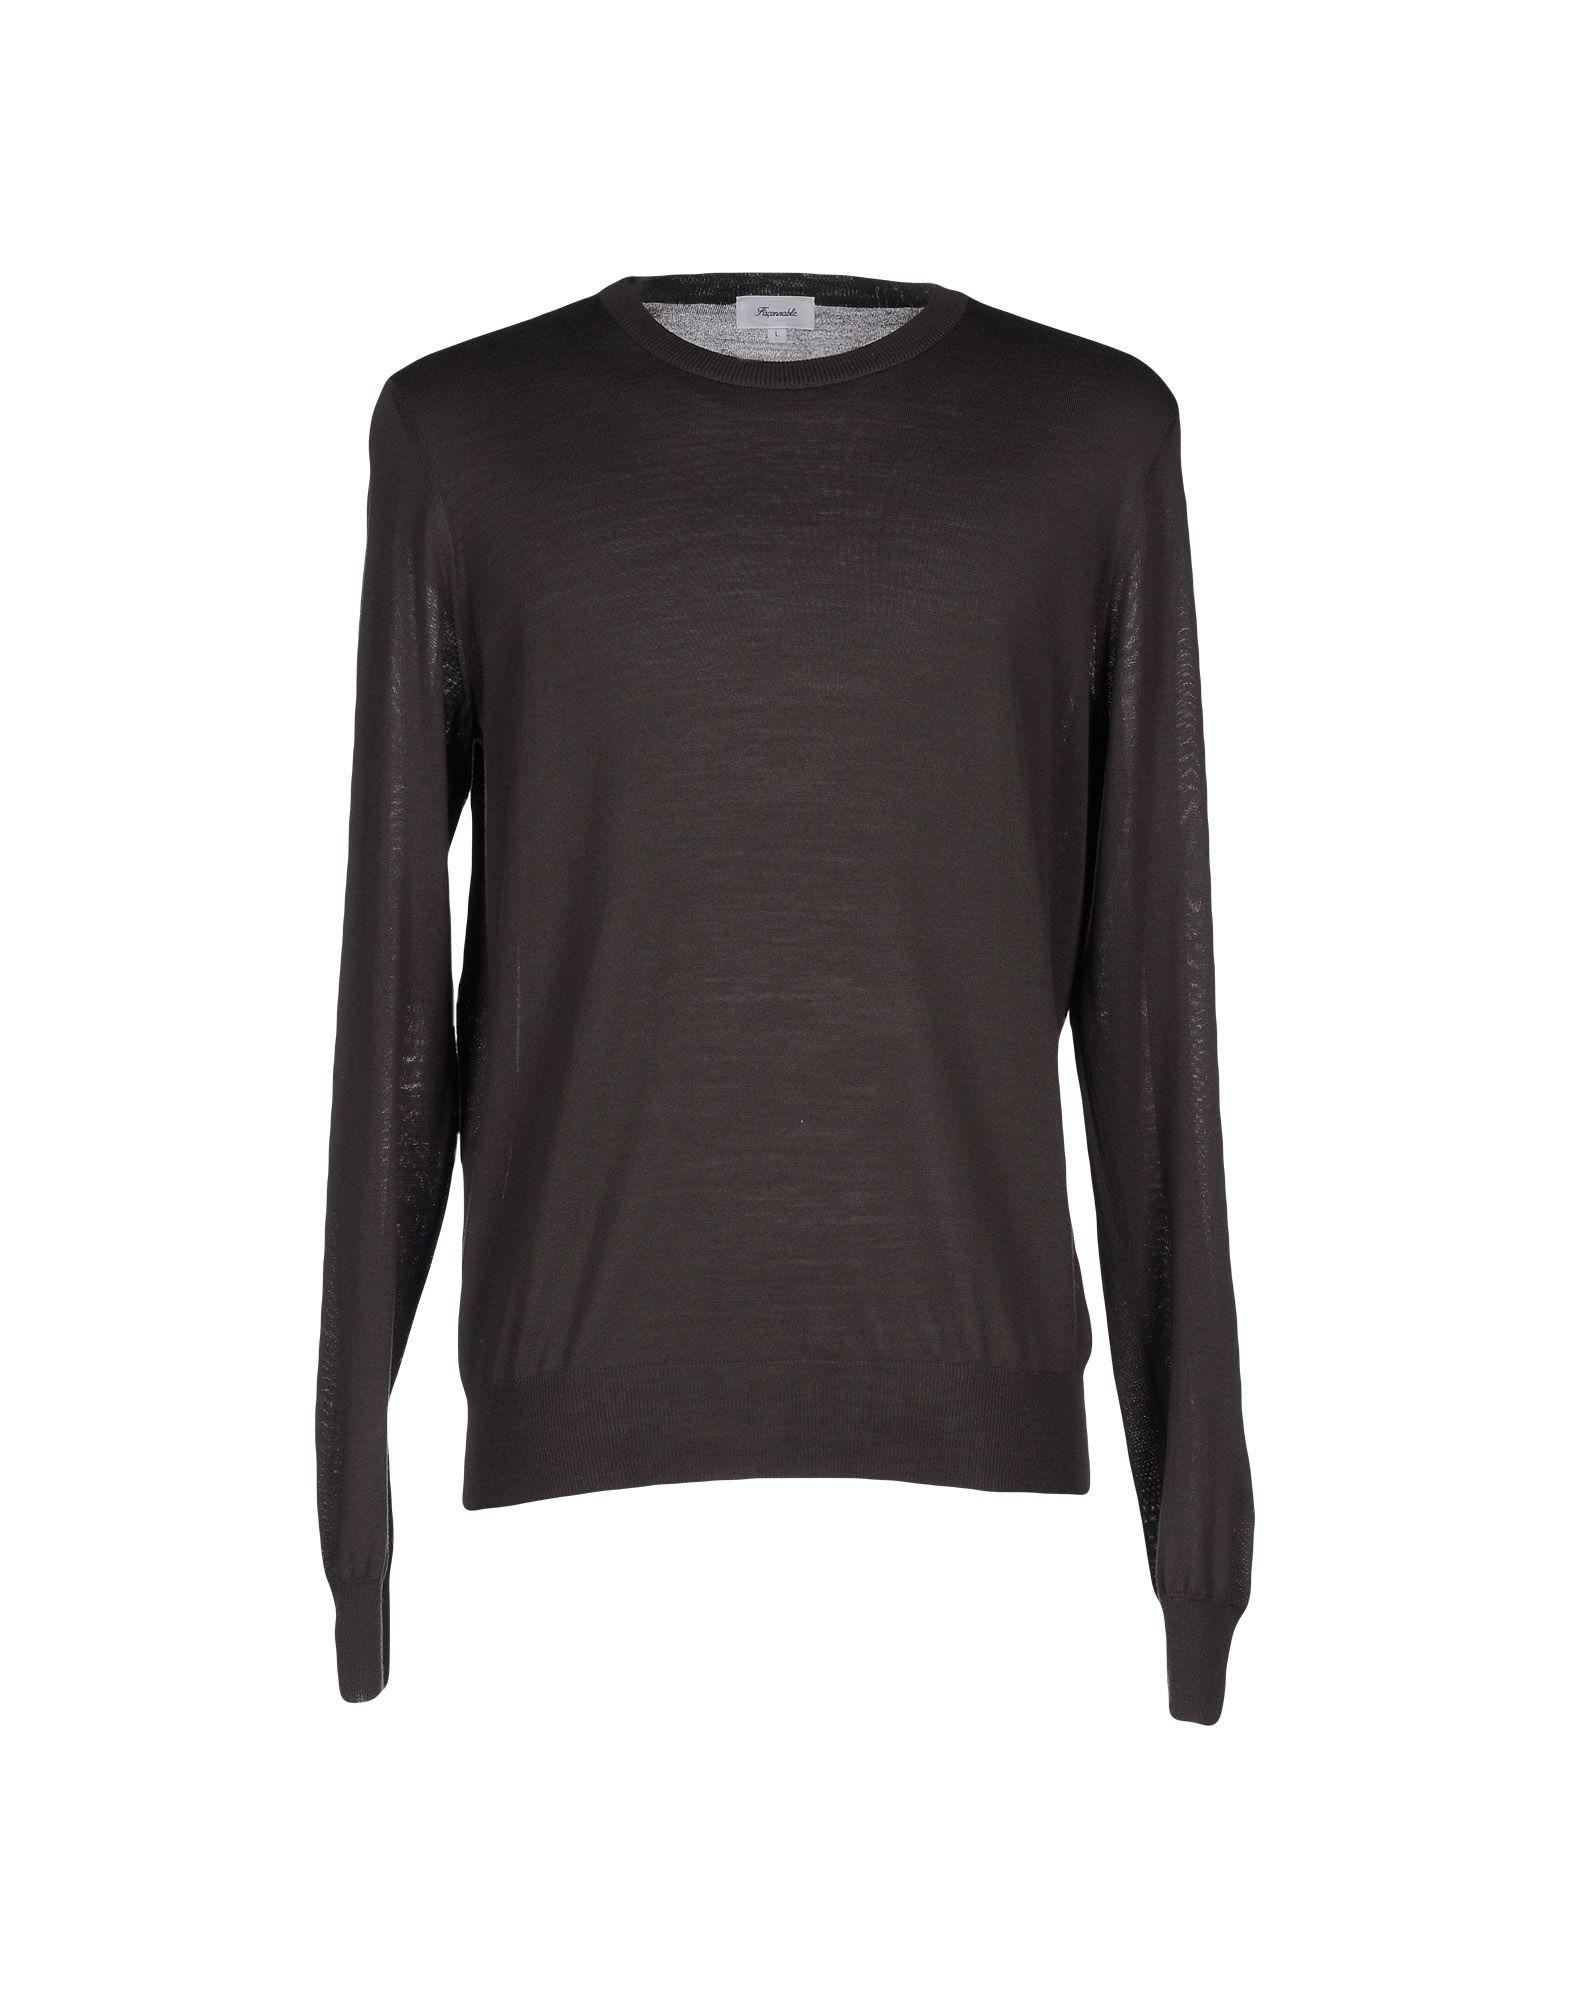 FaÇOnnable Sweater In Dark Brown | ModeSens